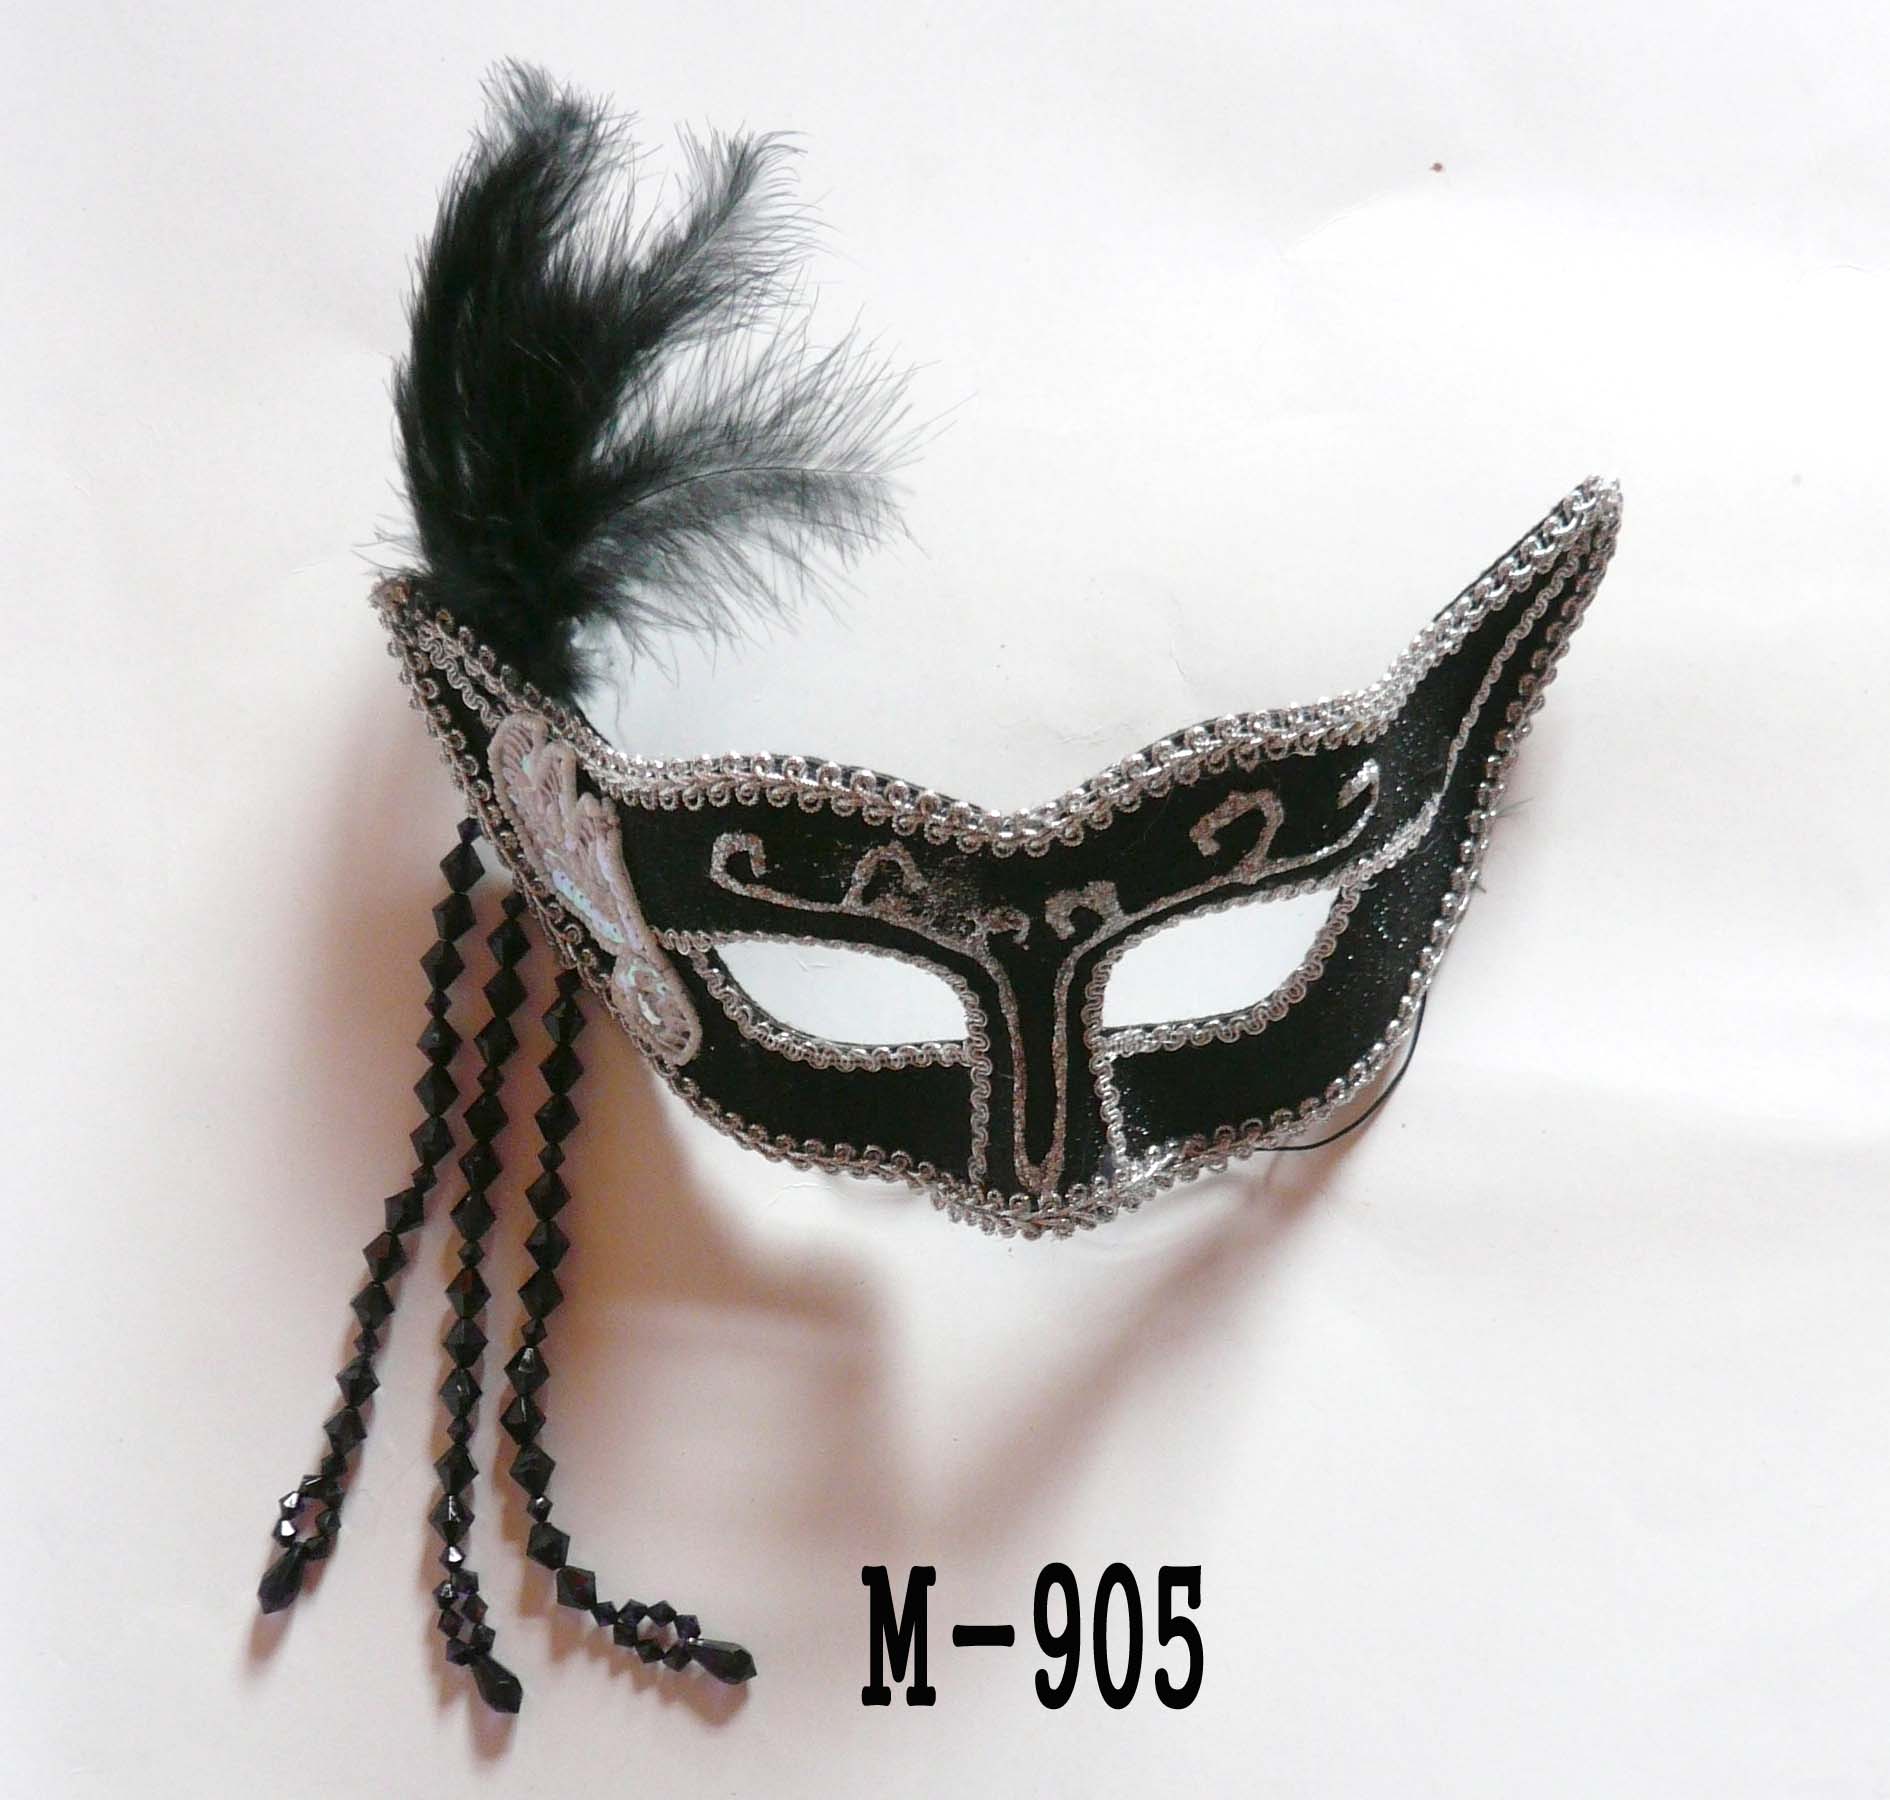 Cheap feather masks for sale - Made in China M-903